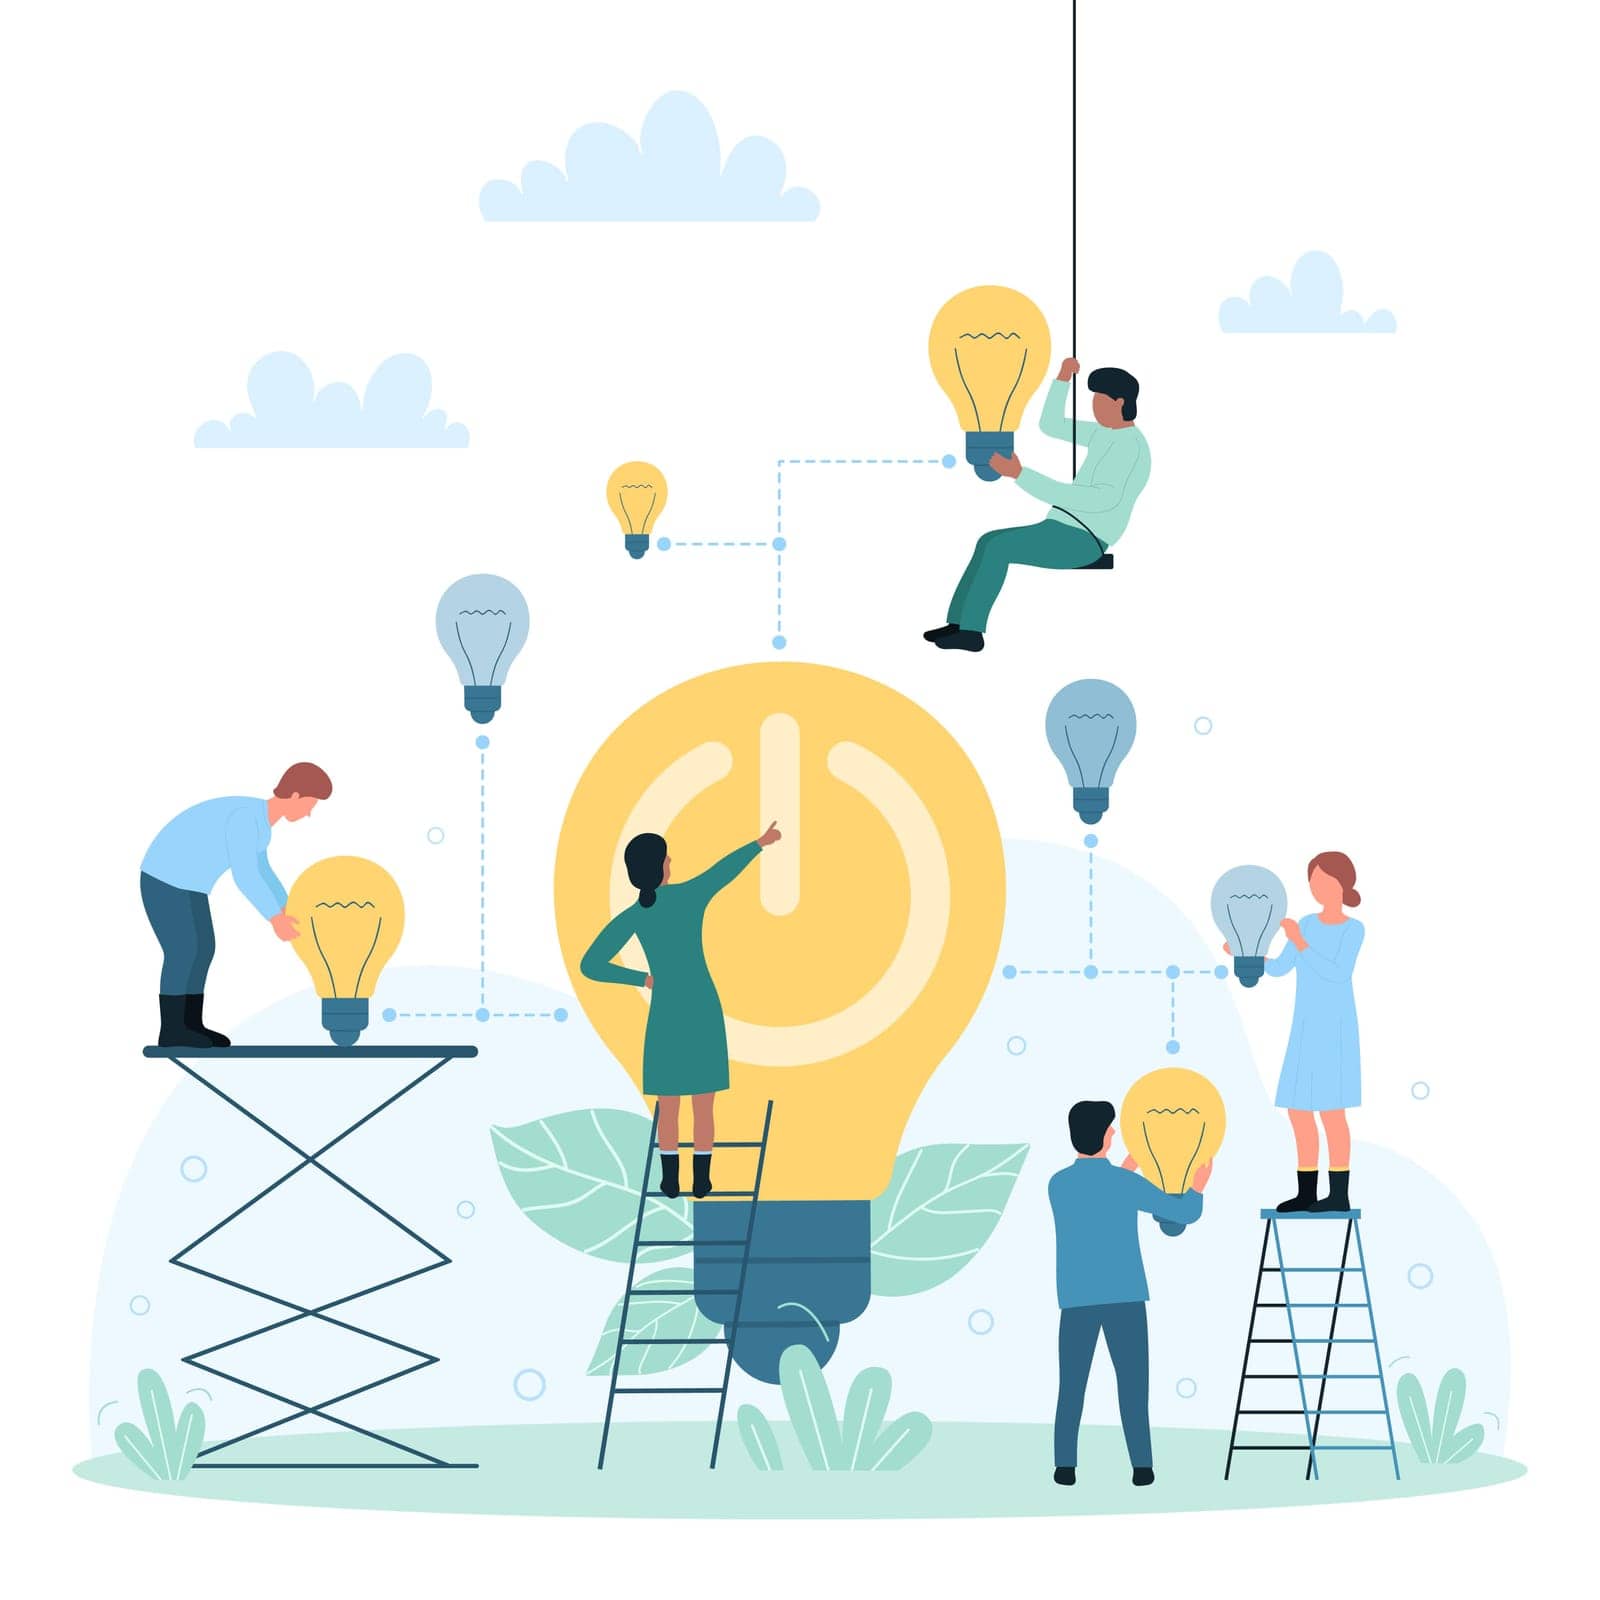 Environmental conservation and green technology to save energy and electricity vector illustration. Cartoon tiny people pressing power button inside light bulb, employees holding bright lamps